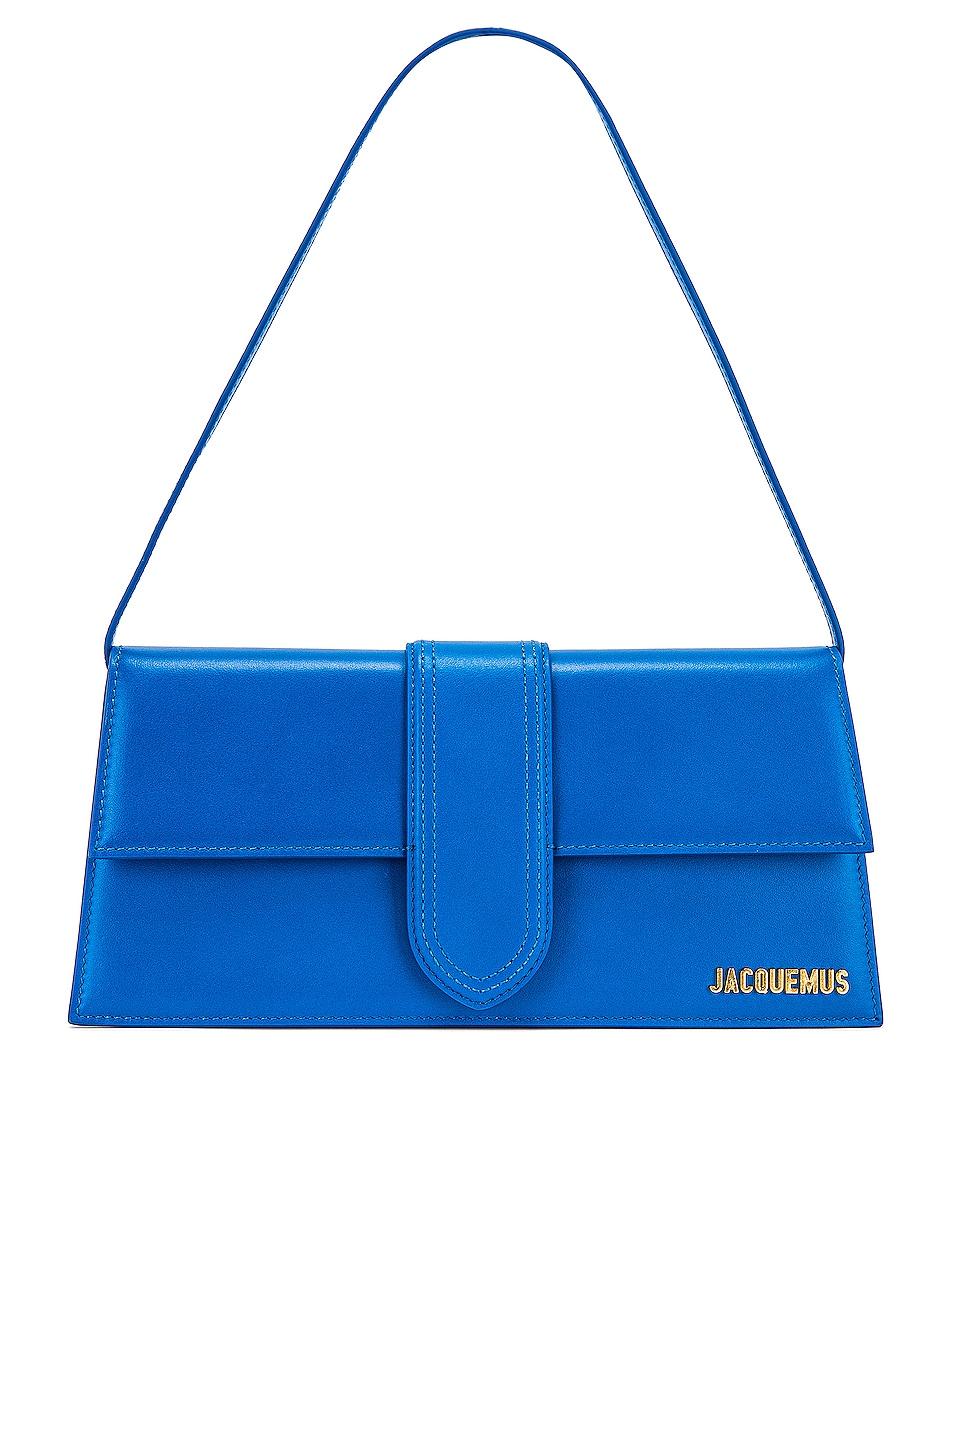 Jacquemus Leather Le Bambino Long Bag in Blue | Lyst